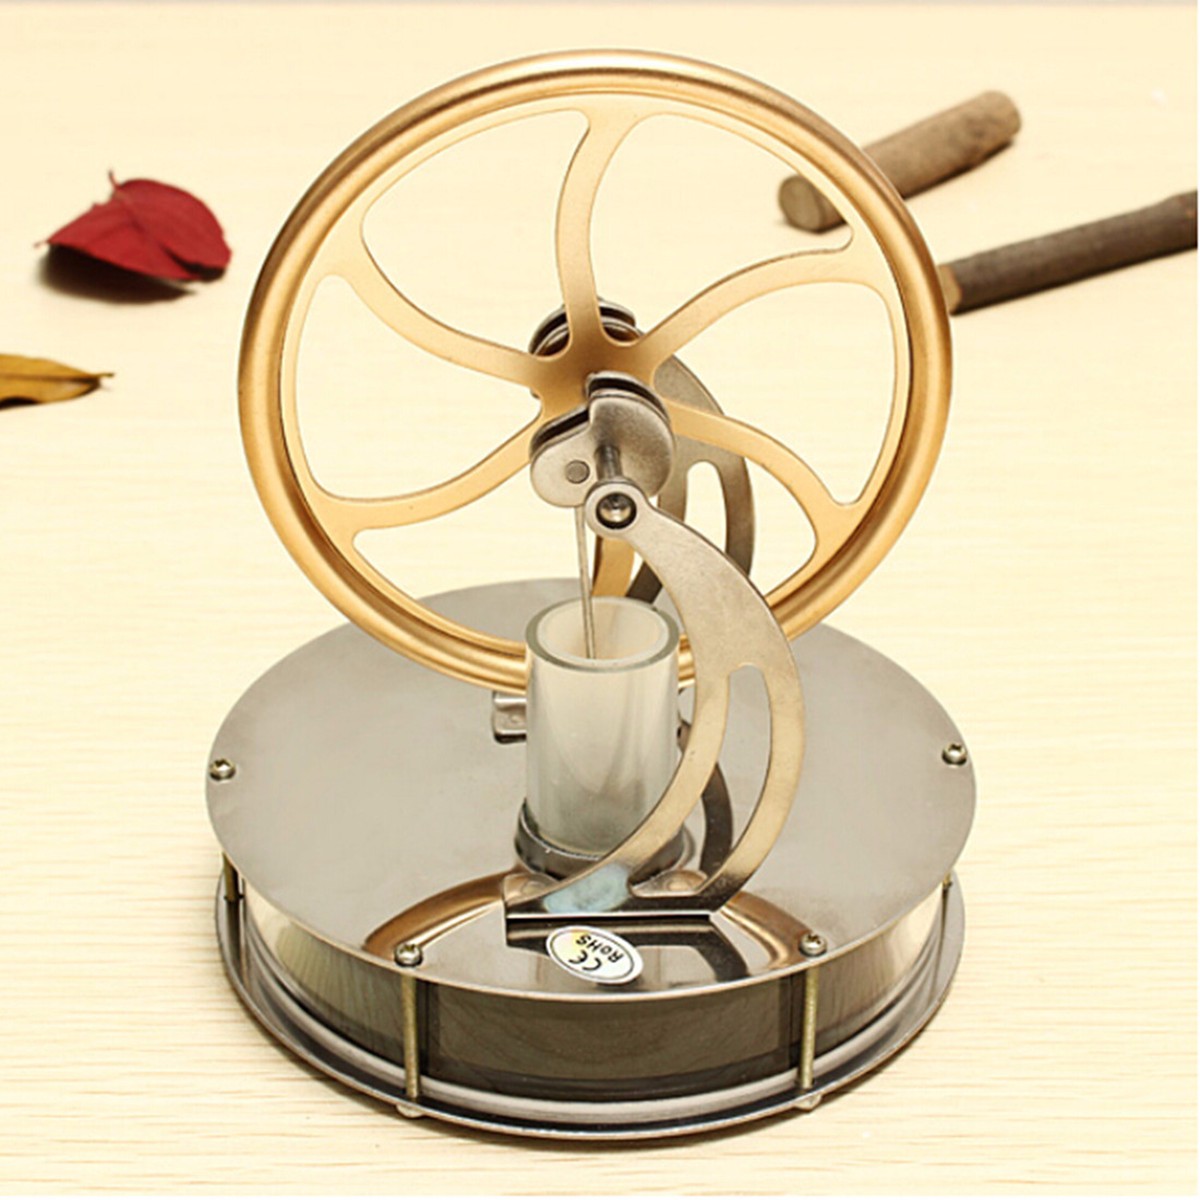 Low-Temperature-Stirling-Engine-Motor-Temperature-Difference-Cool-Model-Educational-Toy-1164414-1